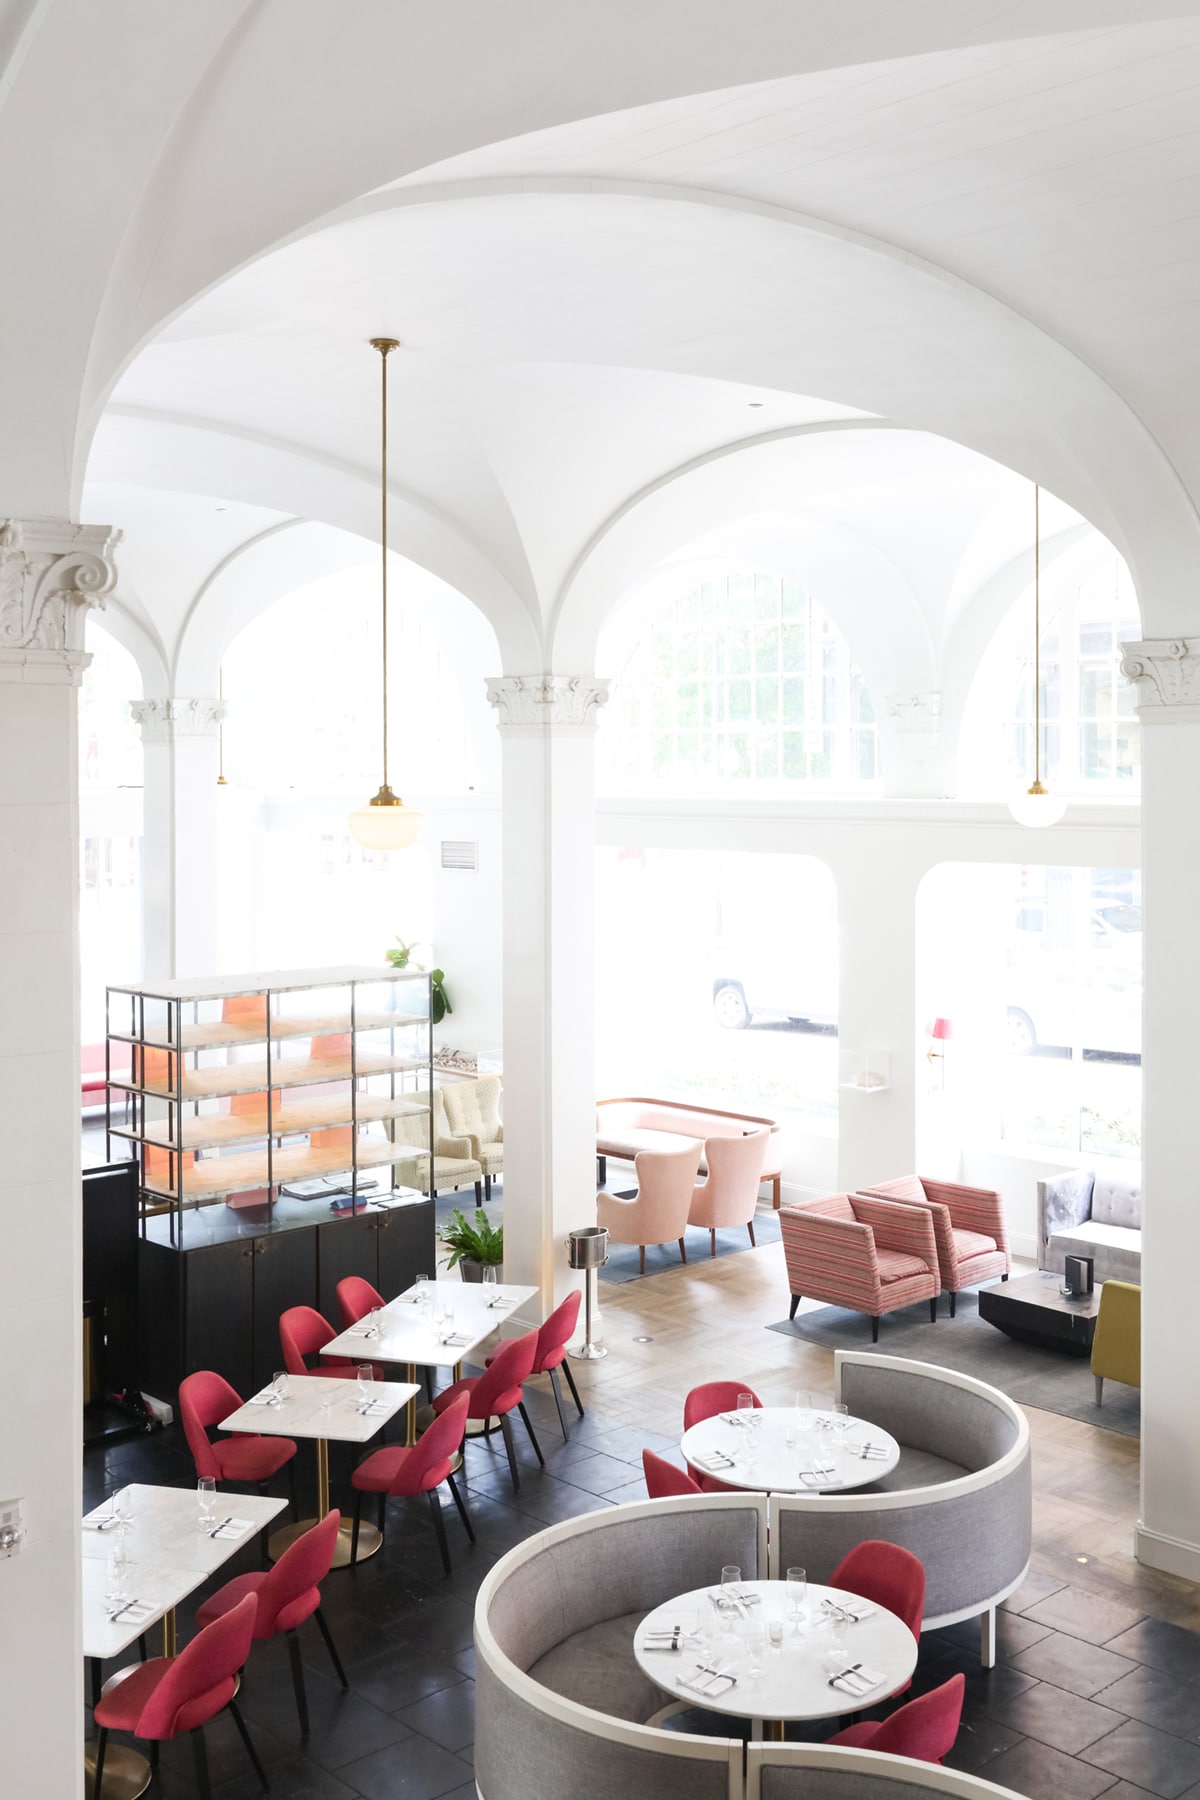 vaulted arch ceilings bring drama to the lobby restaurant at The Quirk Hotel | wanderlust design on coco kelley